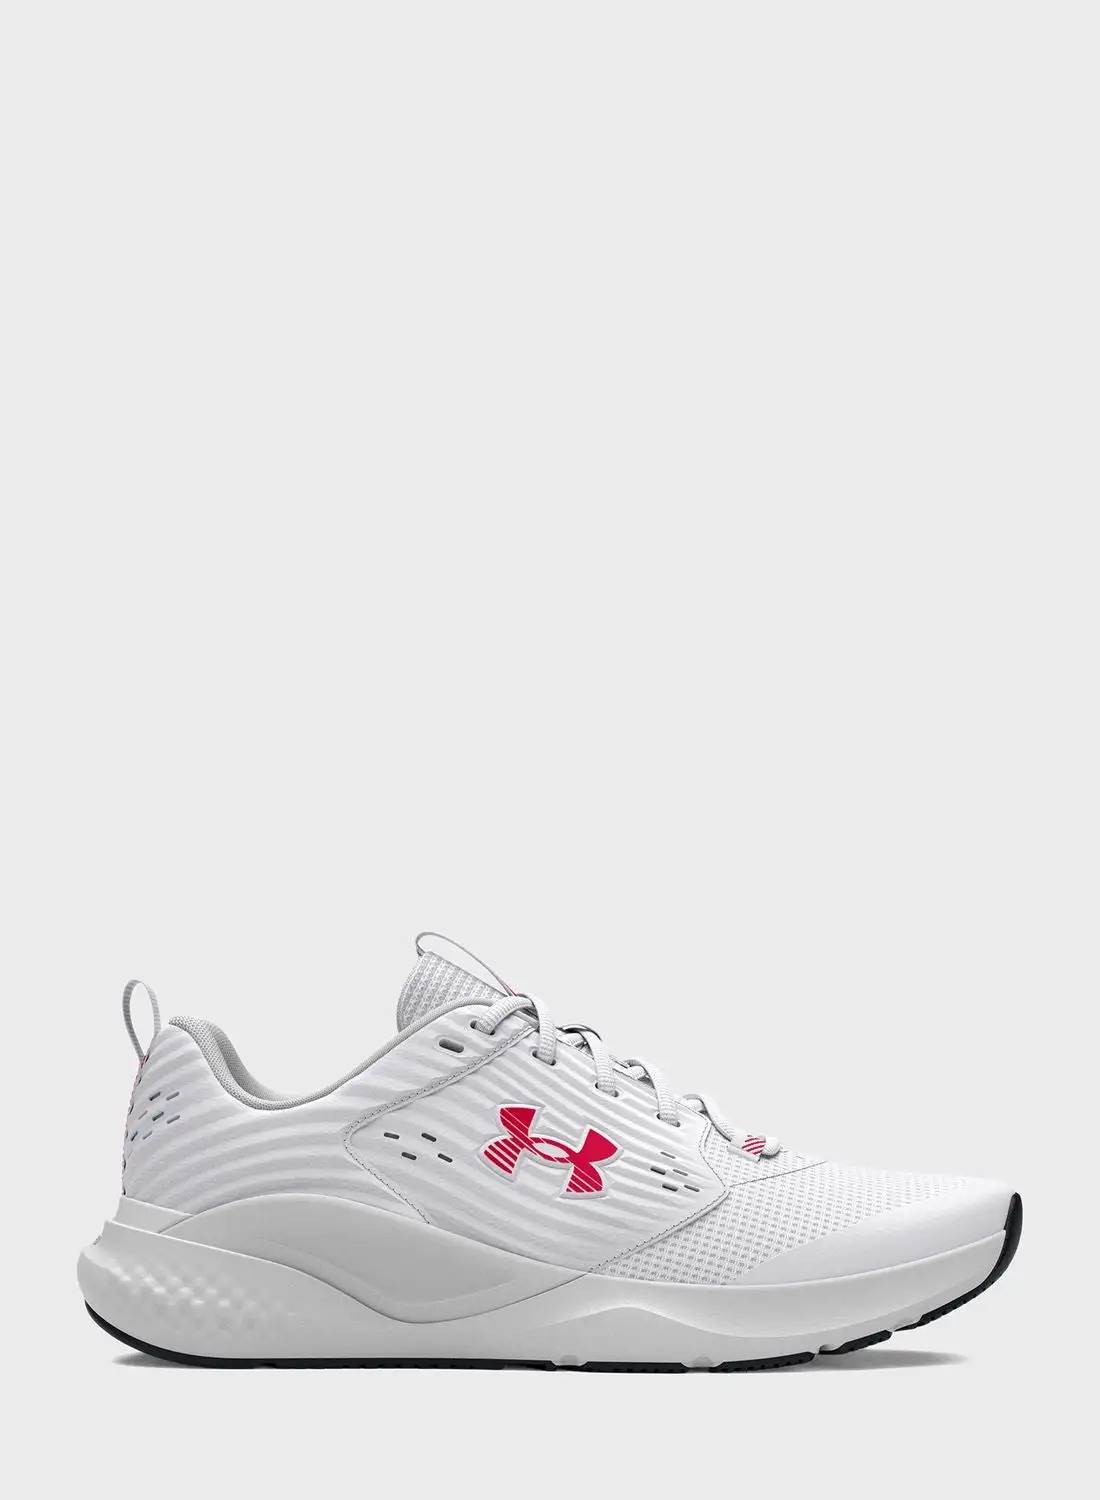 UNDER ARMOUR Charged Commit Trail 4 Shoes